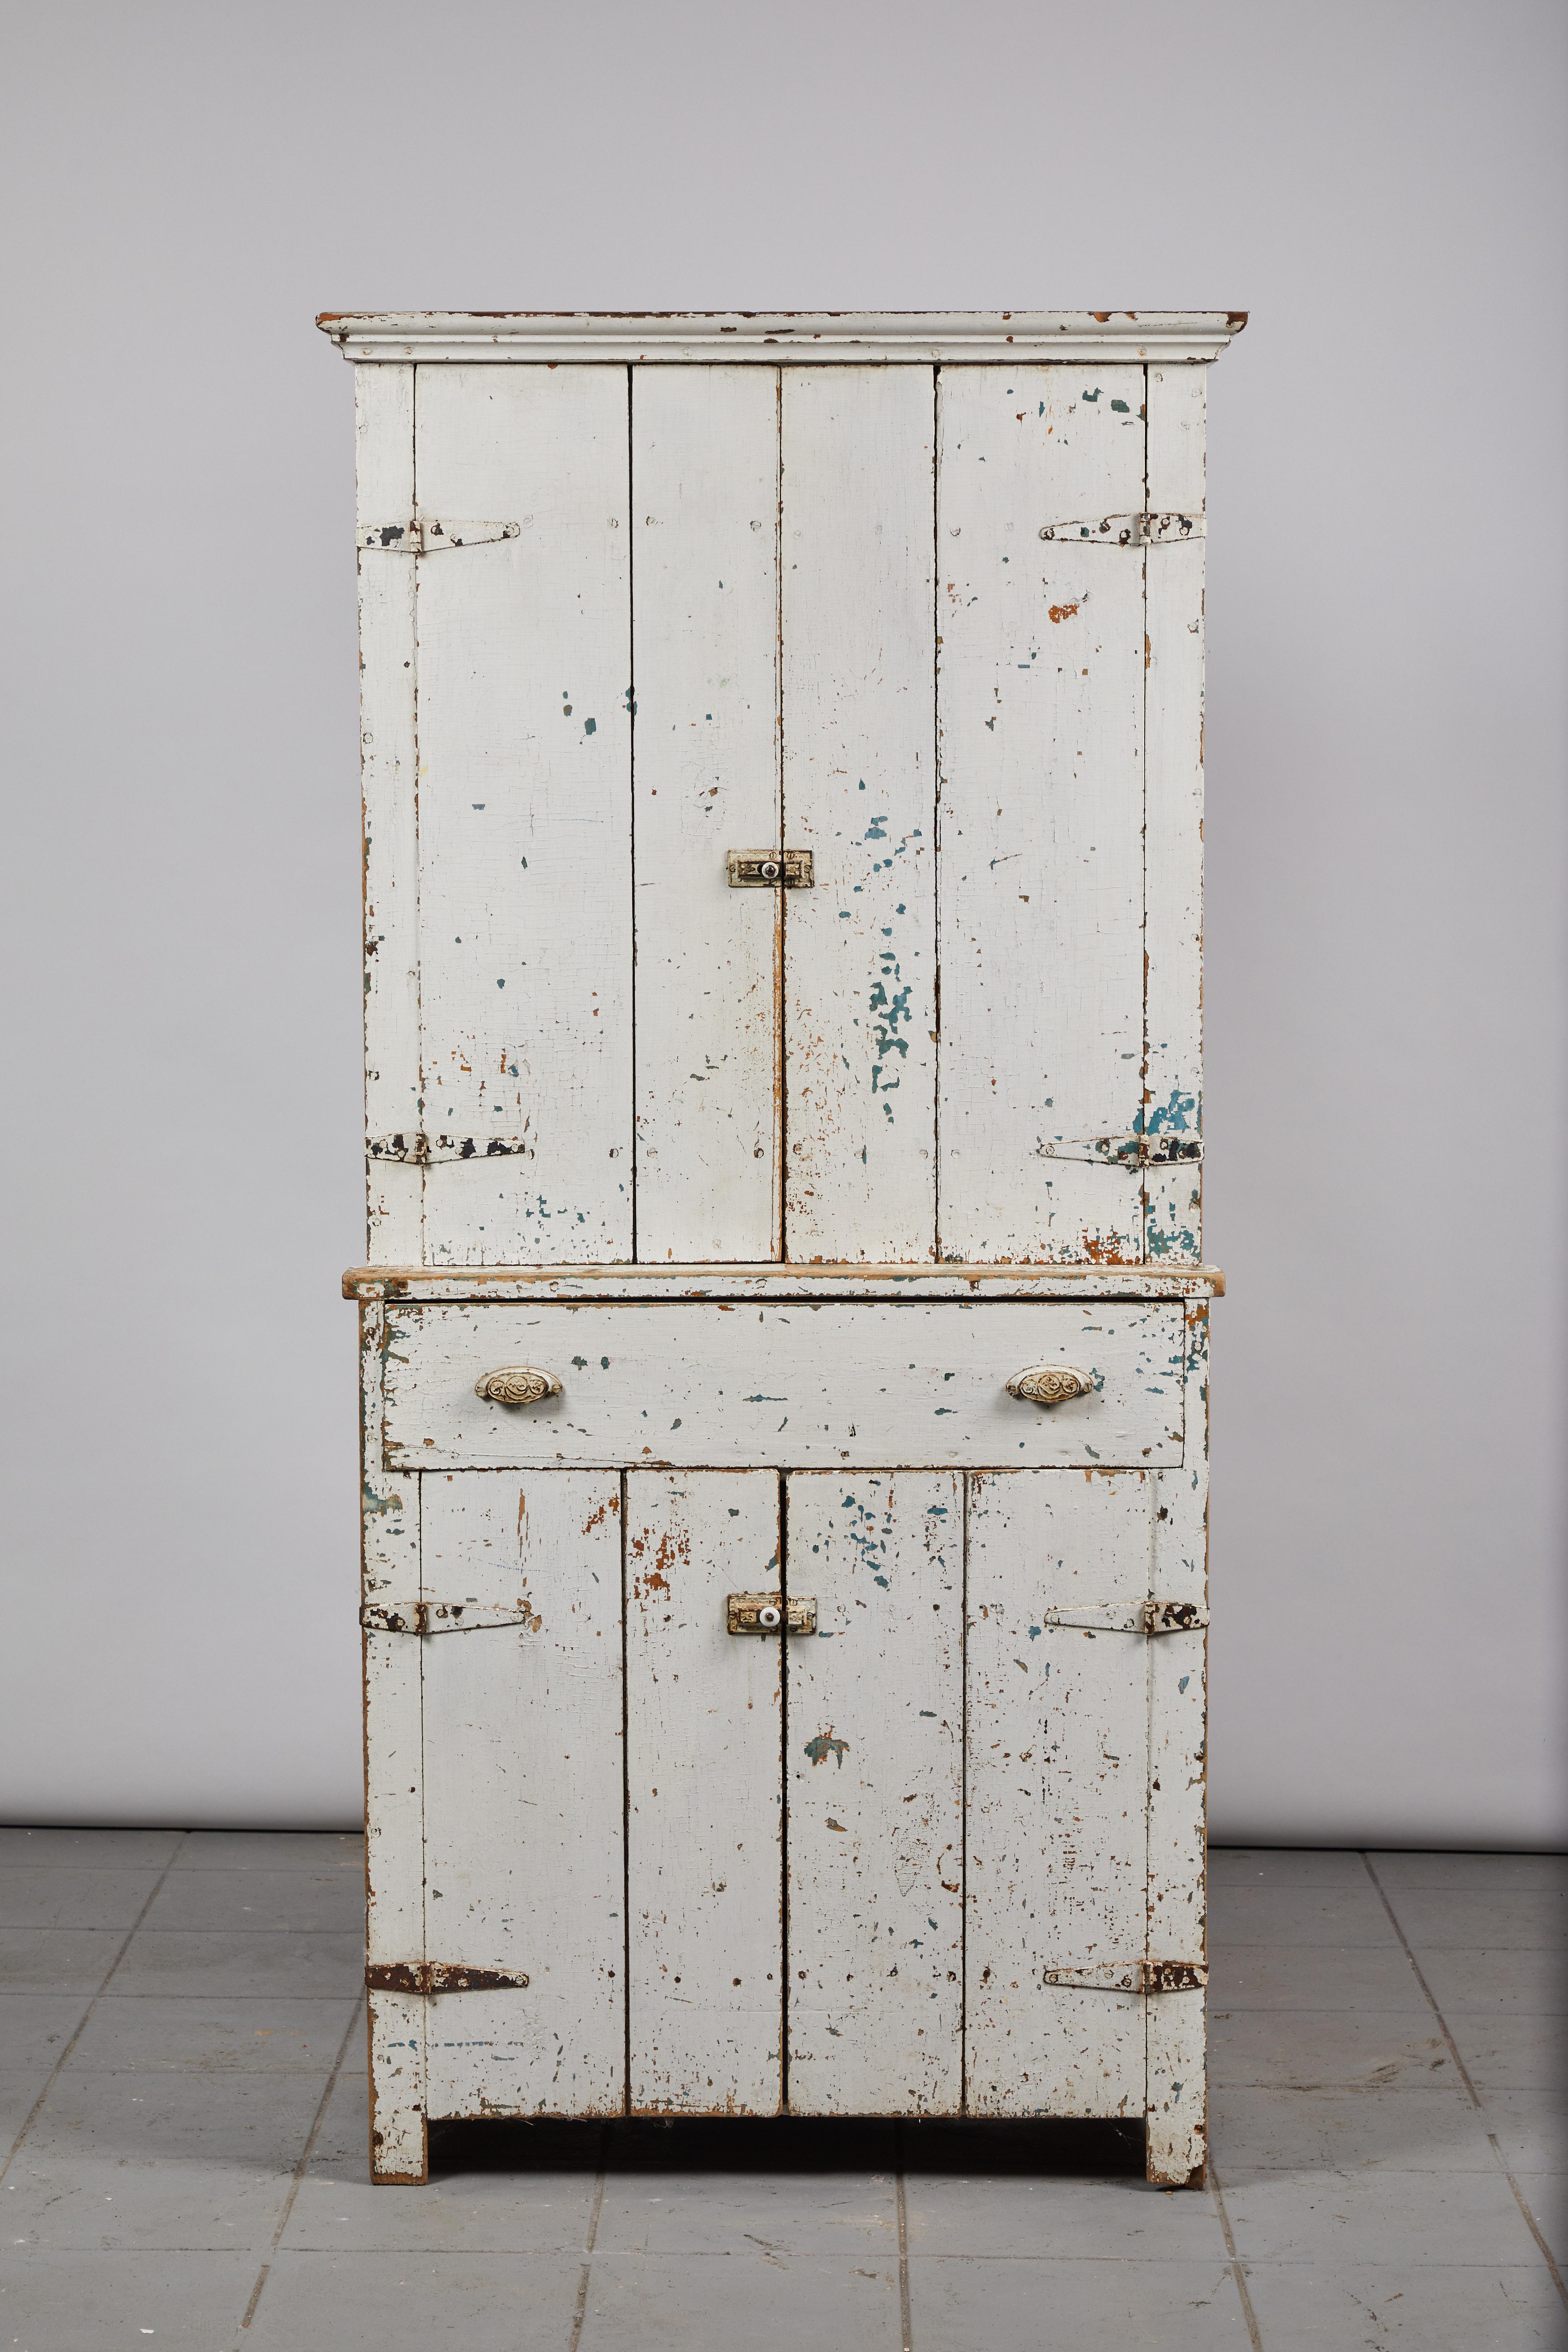 Early American rustic white painted cabinet with four doors and a middle center pull our drawer.